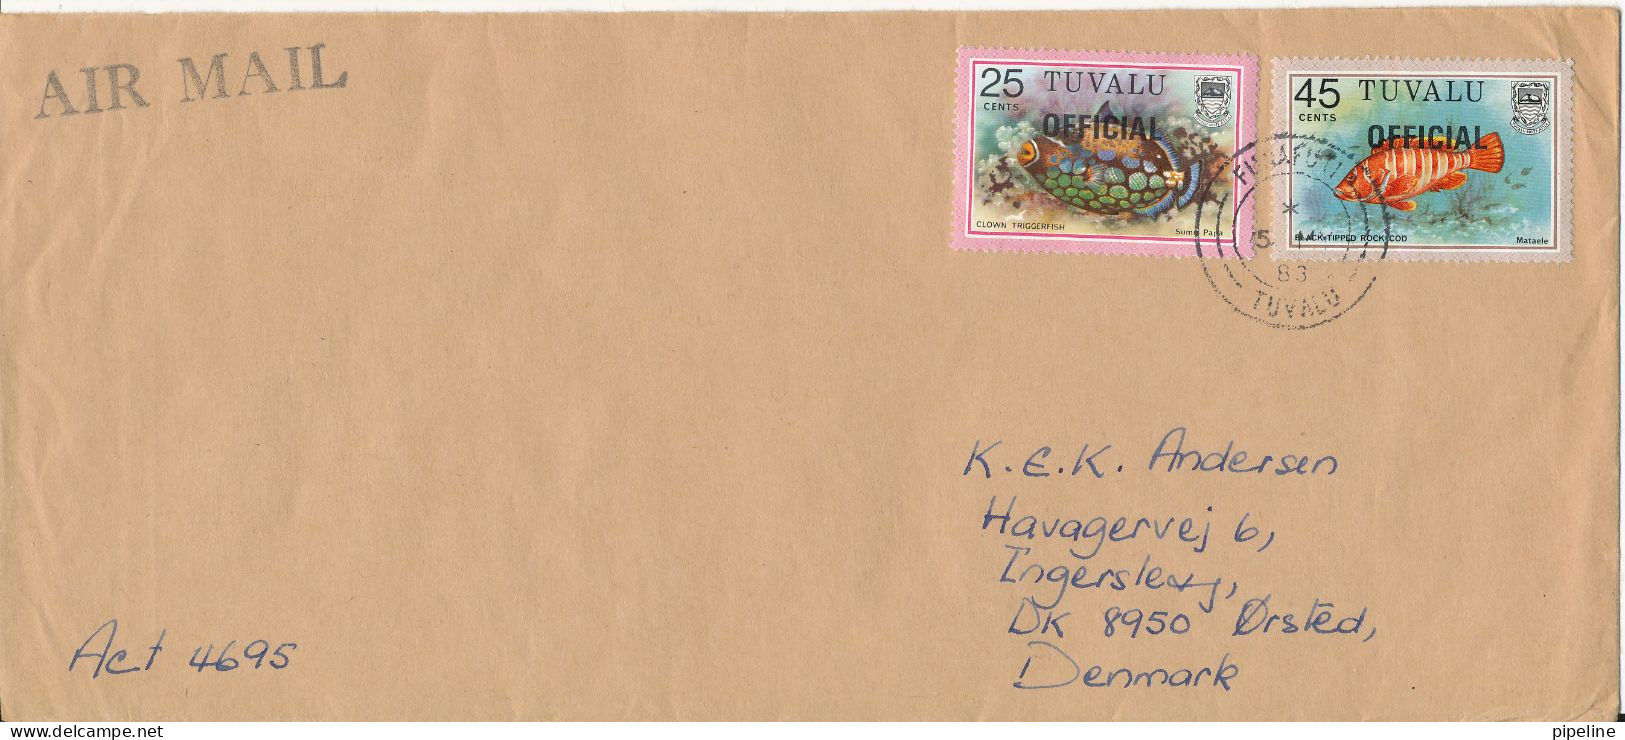 Tuvalu Cover Overprinted OFFICIAL Sent Air Mail To Denmark 15-5-1983 Topic Stamps FISH - Tuvalu